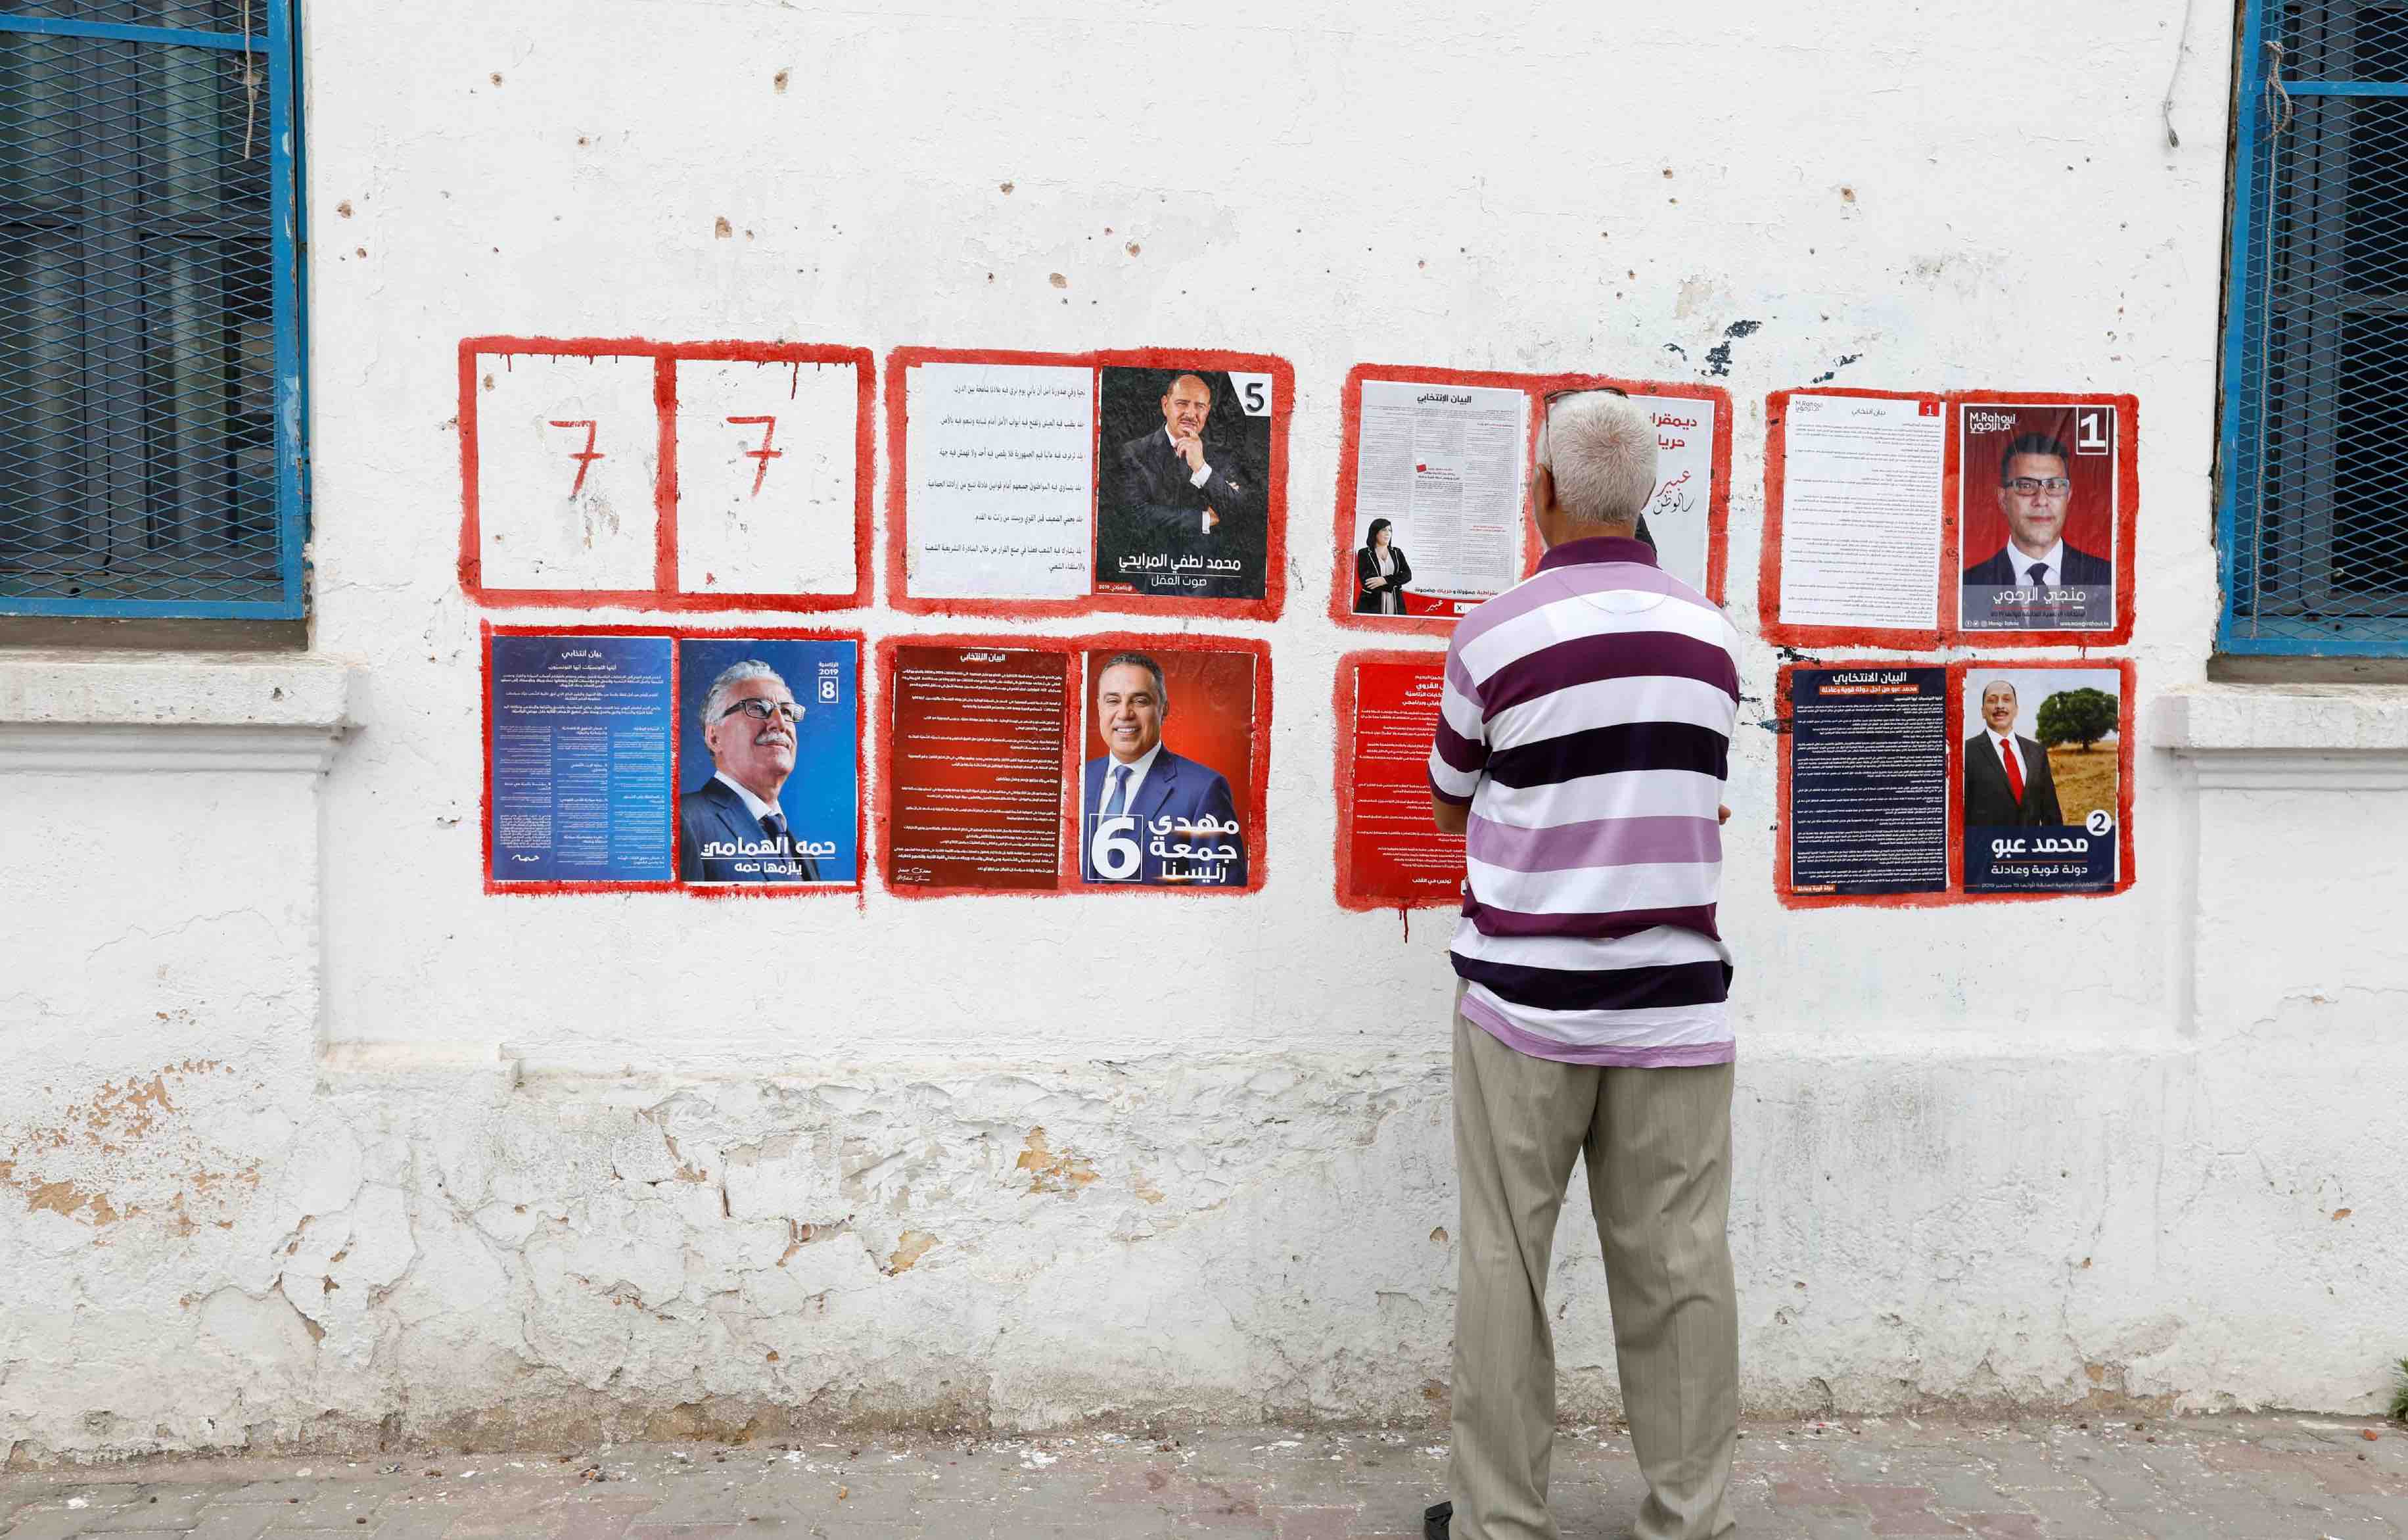 Tunisia has been praised as a rare case of democratic transition after the Arab Spring